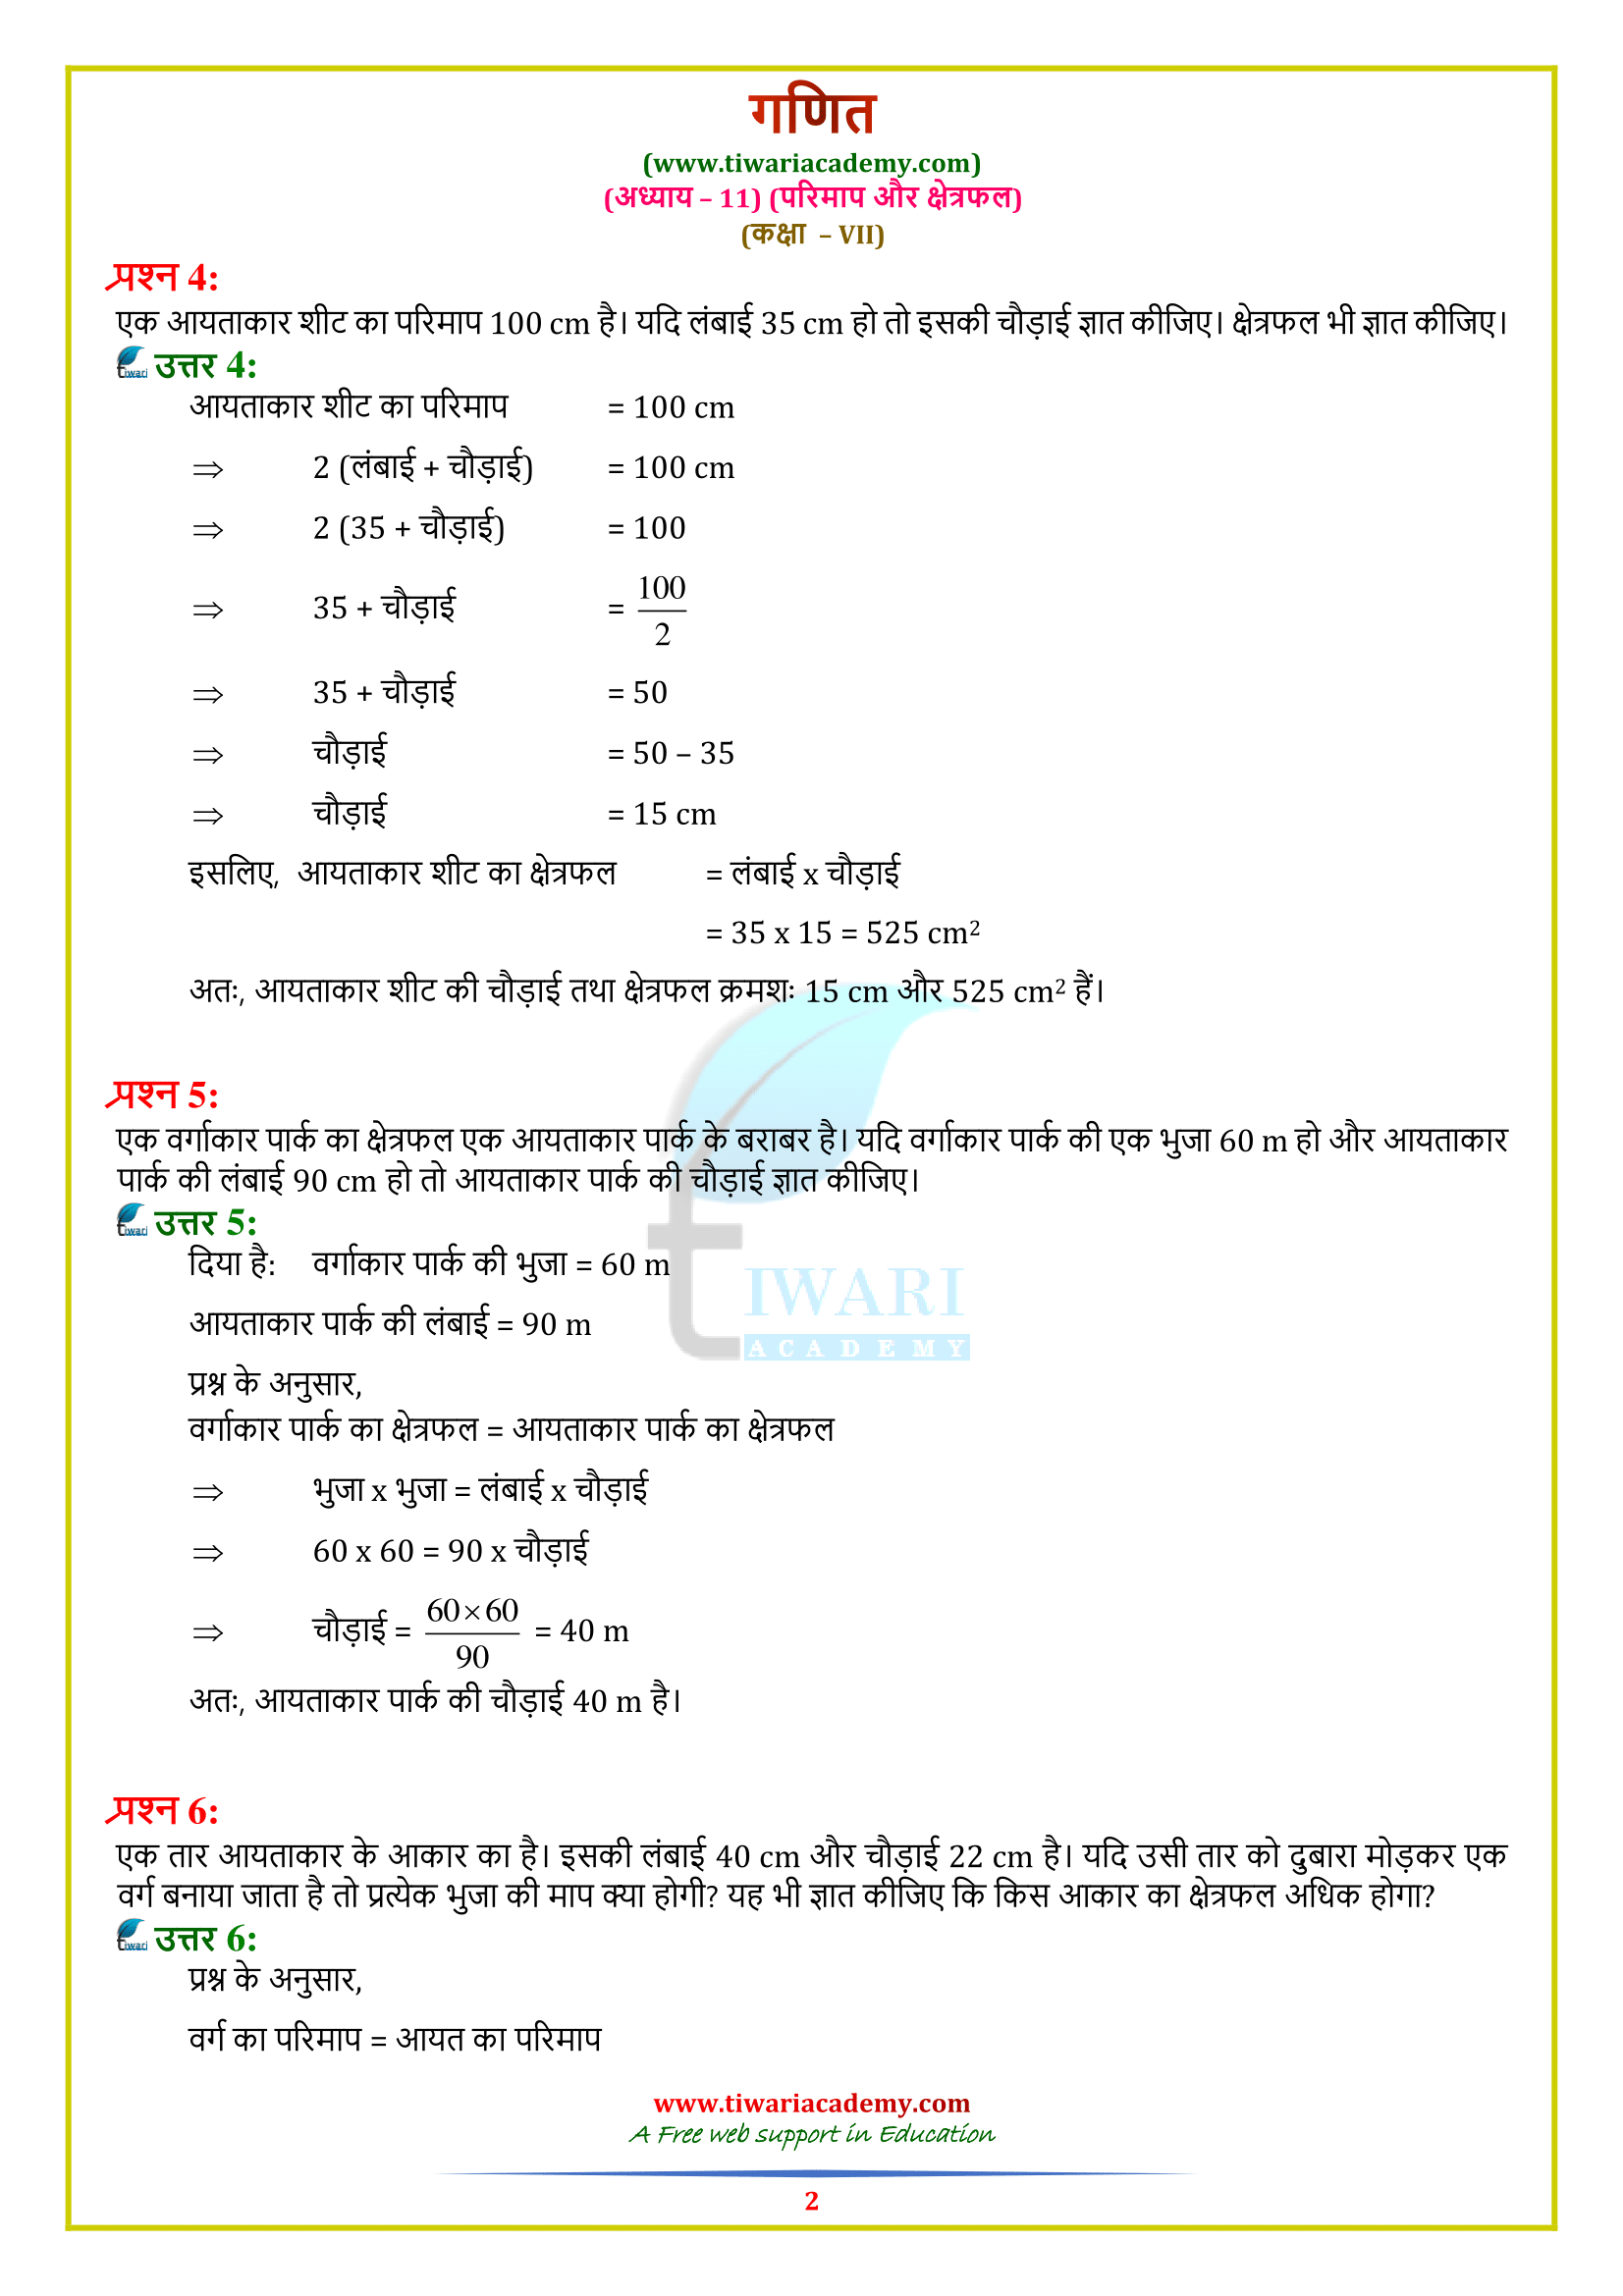 NCERT Solutions for Class 7 Maths Chapter 11 Exercise 11.1 in Hindi free to use